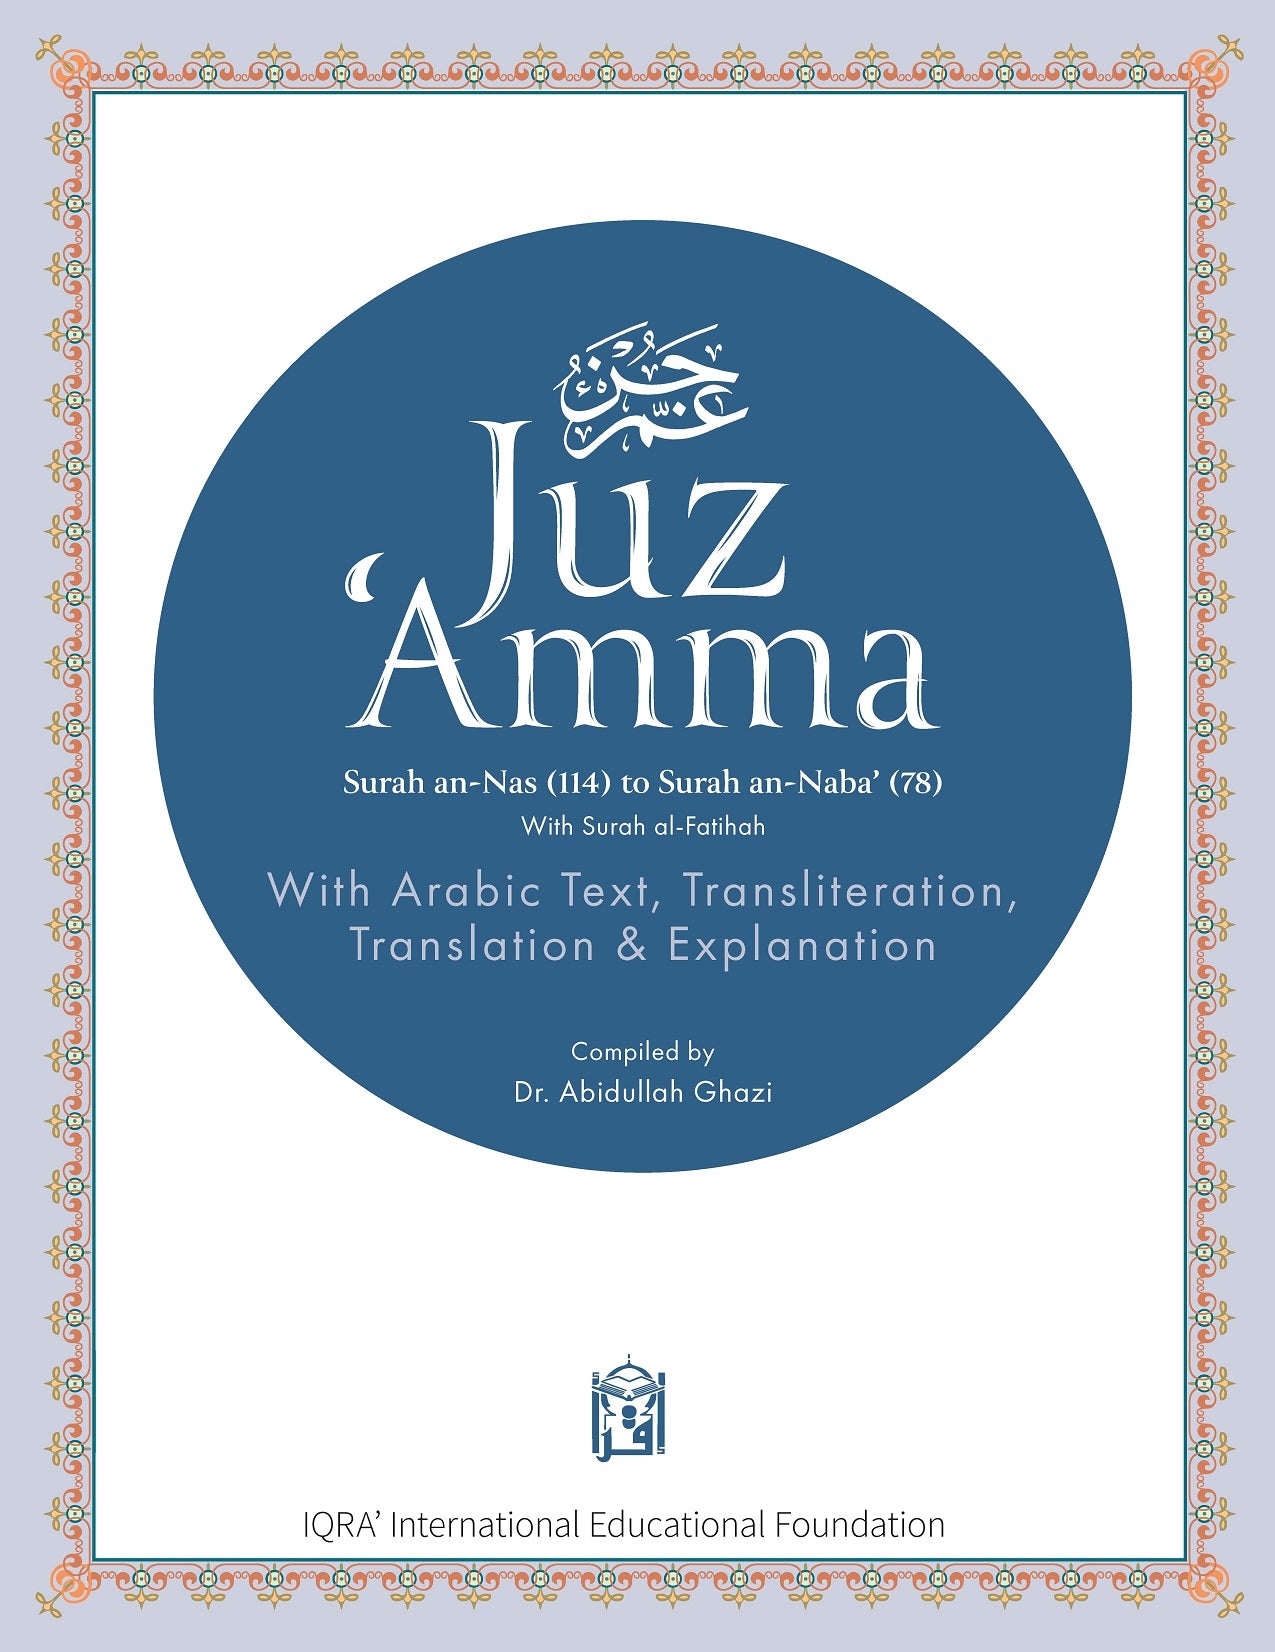 Juz' Amma for the Classroom: Textbook - Premium Textbook from IQRA' international Educational Foundation - Just $16! Shop now at IQRA Book Center | A Division of IQRA' international Educational Foundation